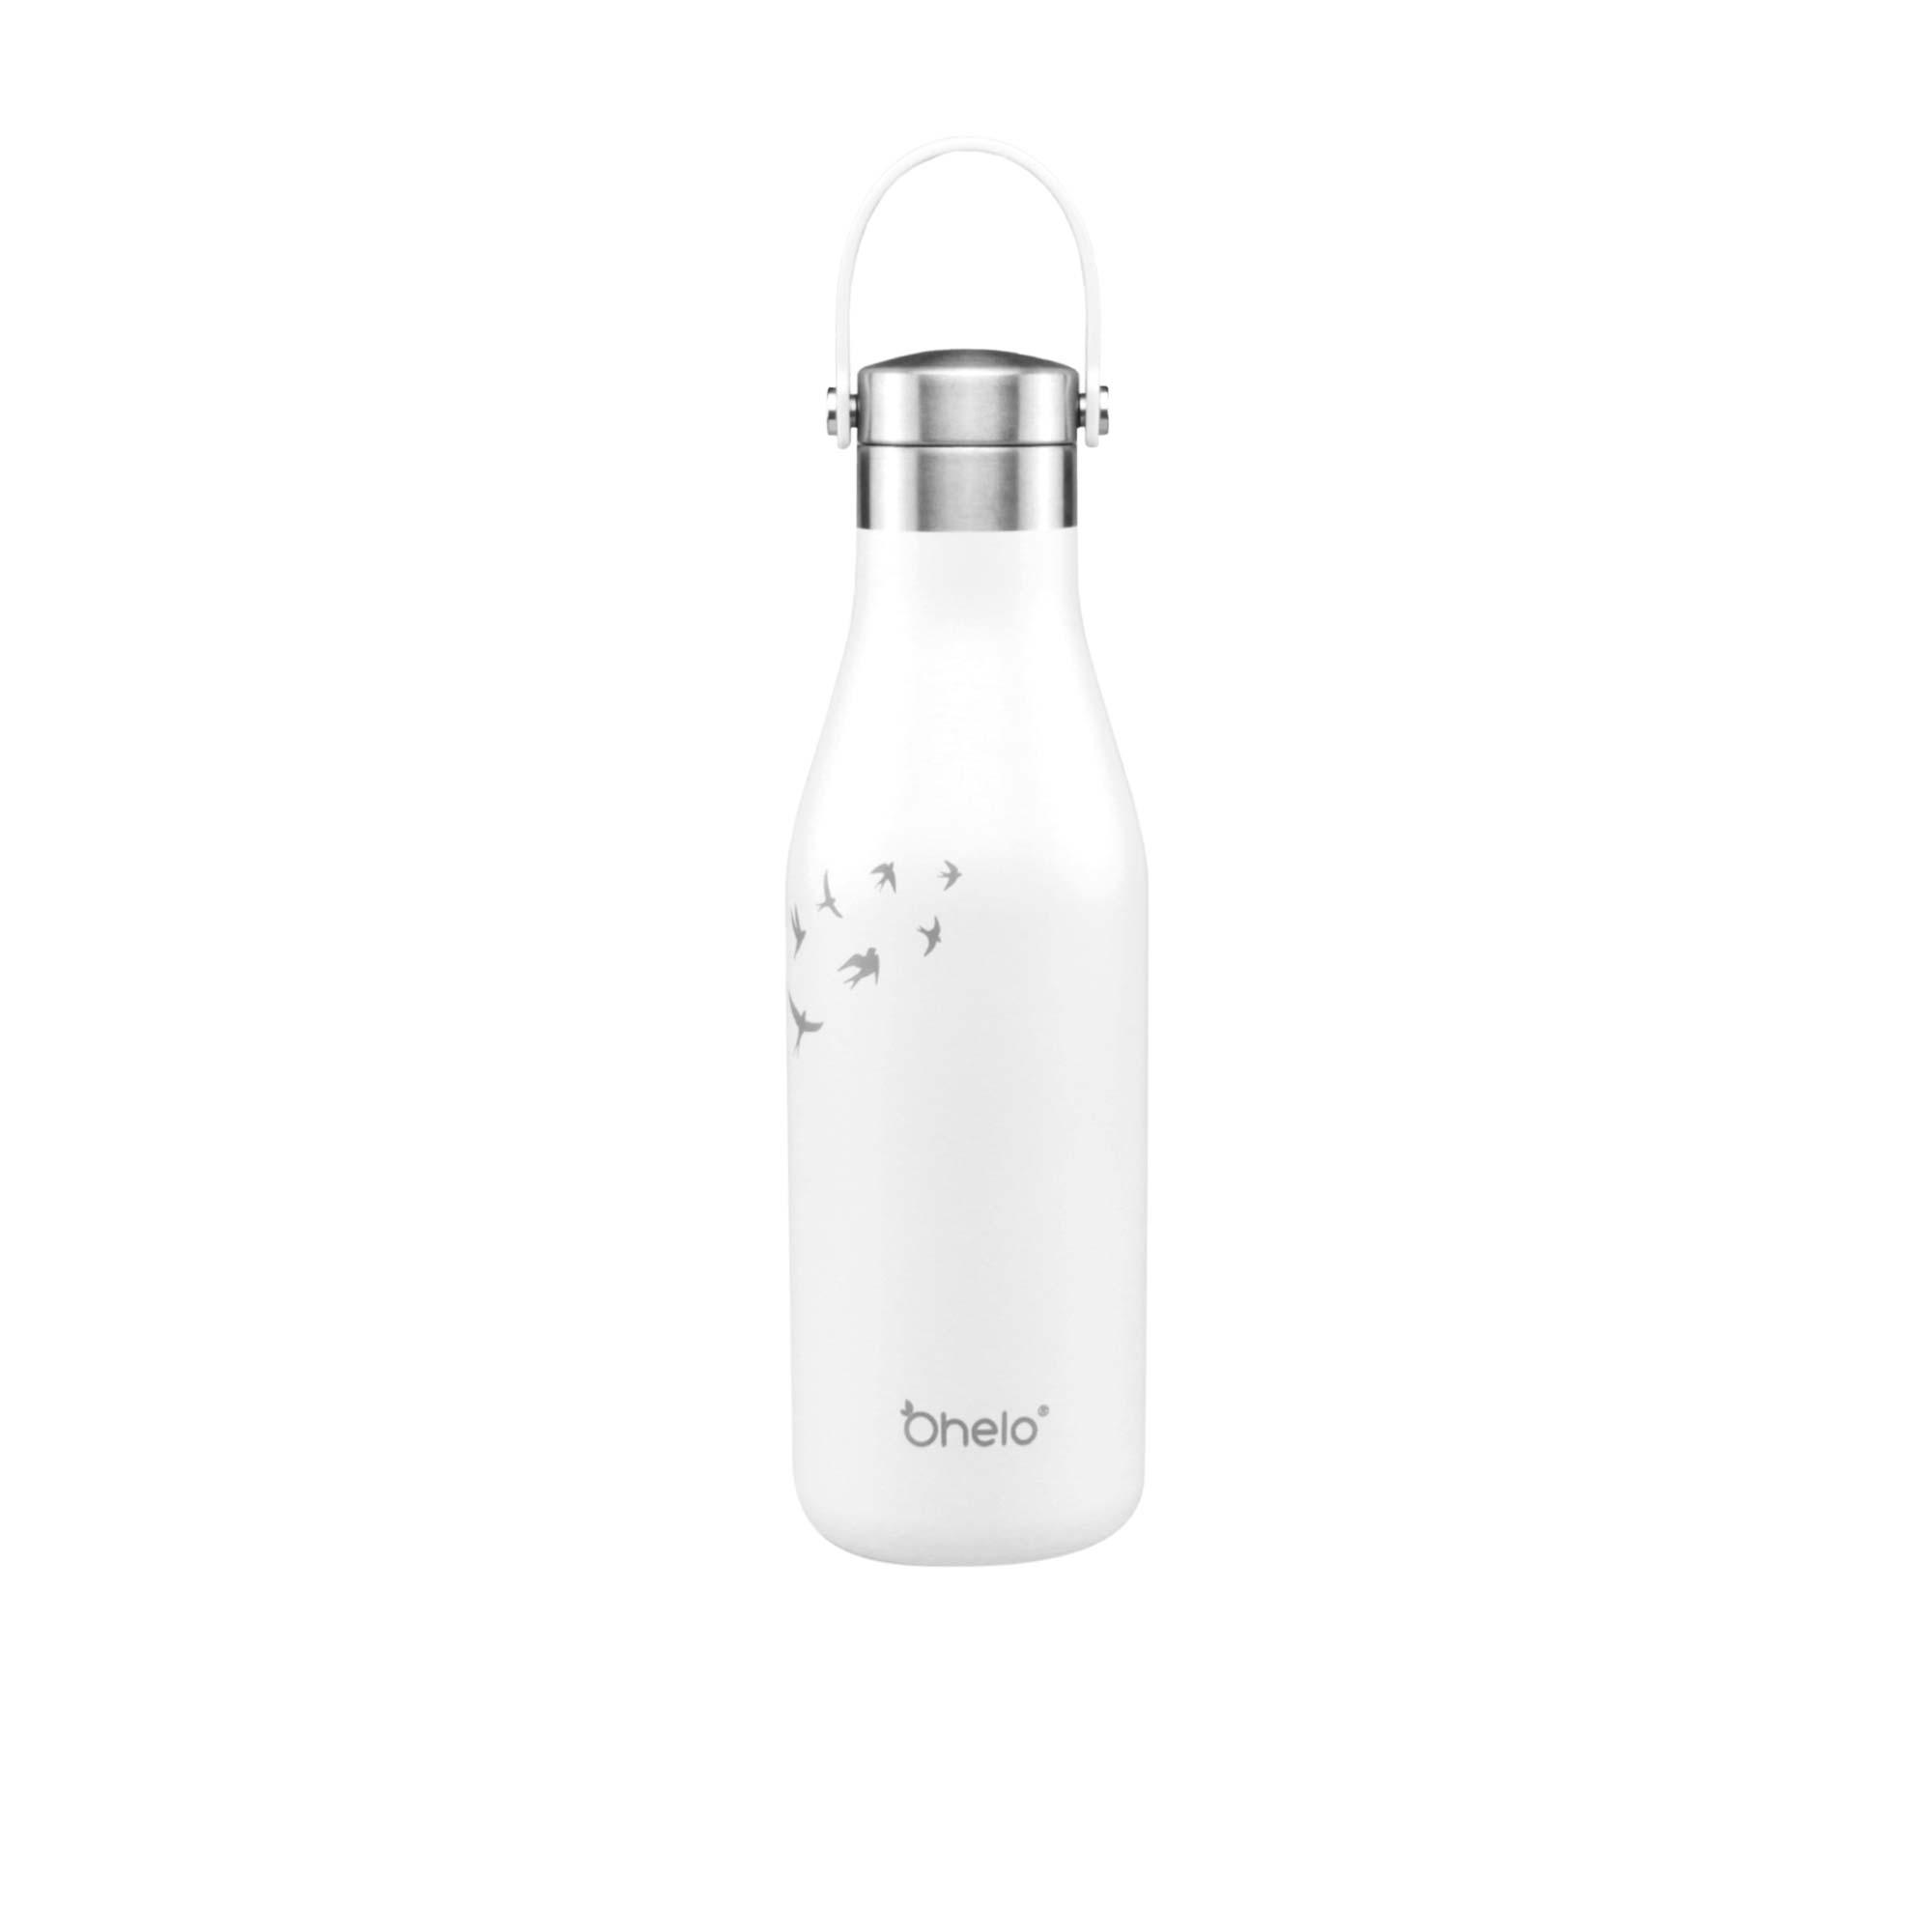 Ohelo Insulated Drink Bottle 500ml White Image 1